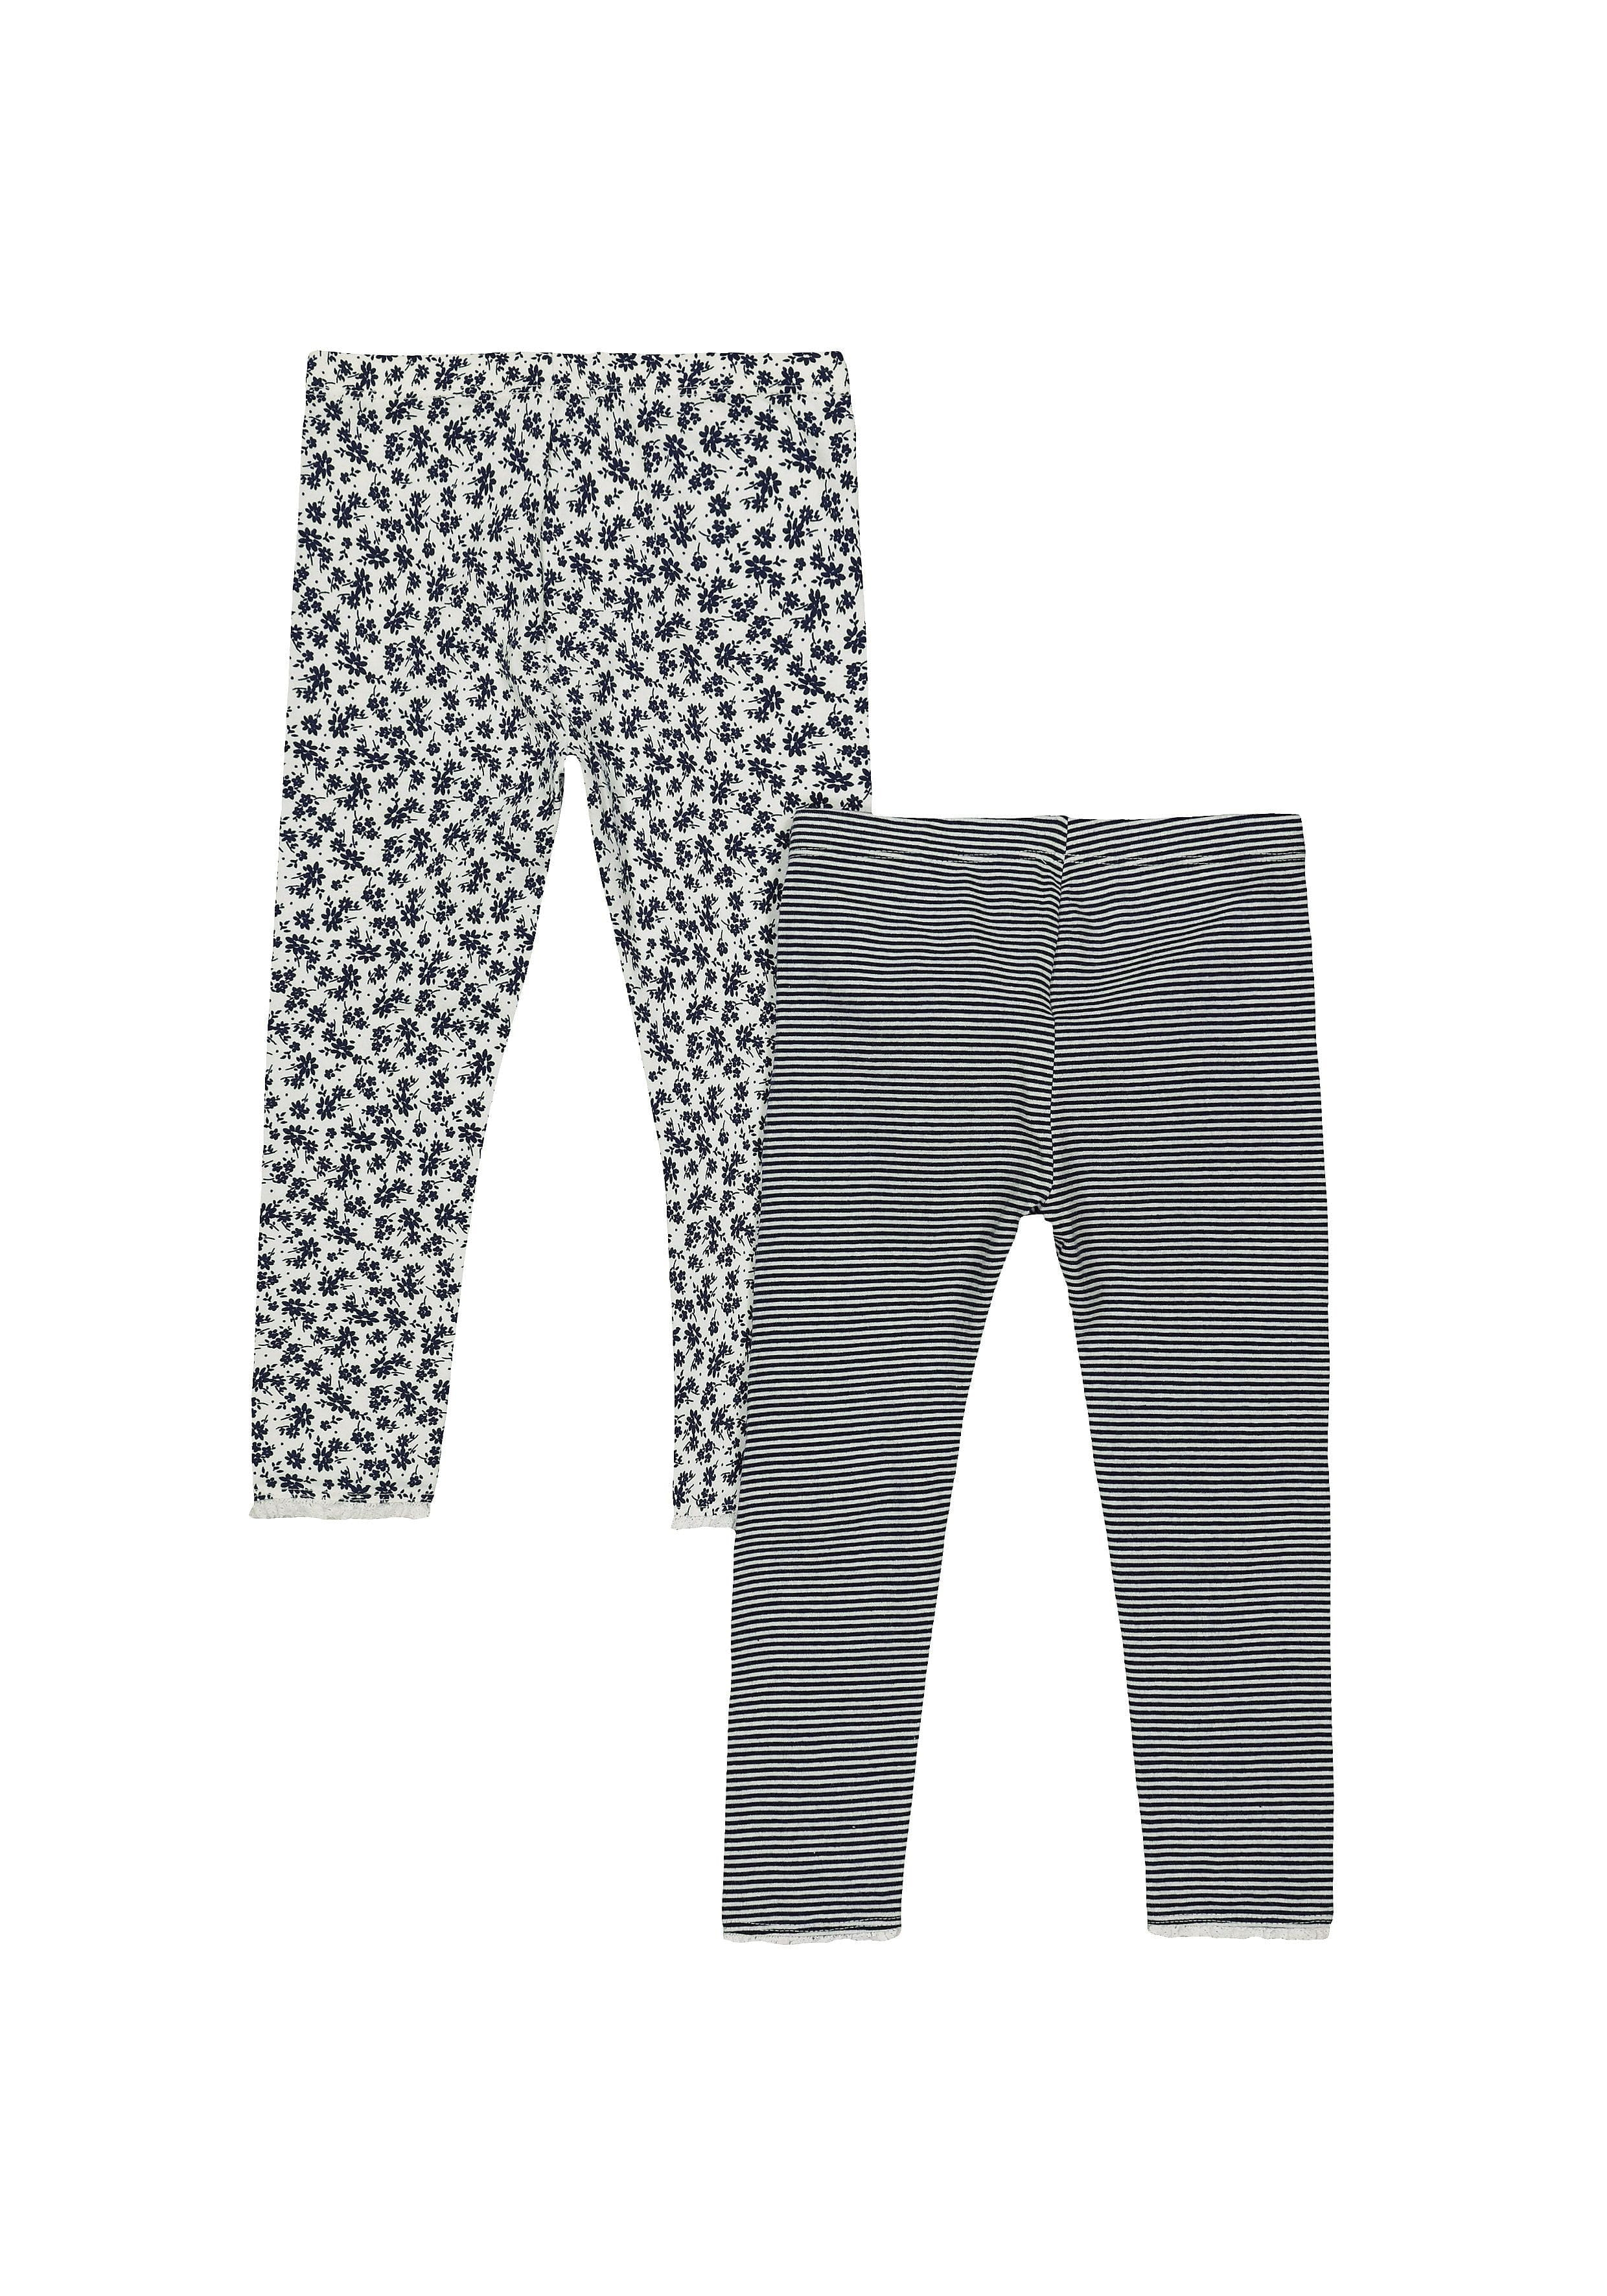 Mothercare | White and Blue Printed Trousers - Pack of 2 0